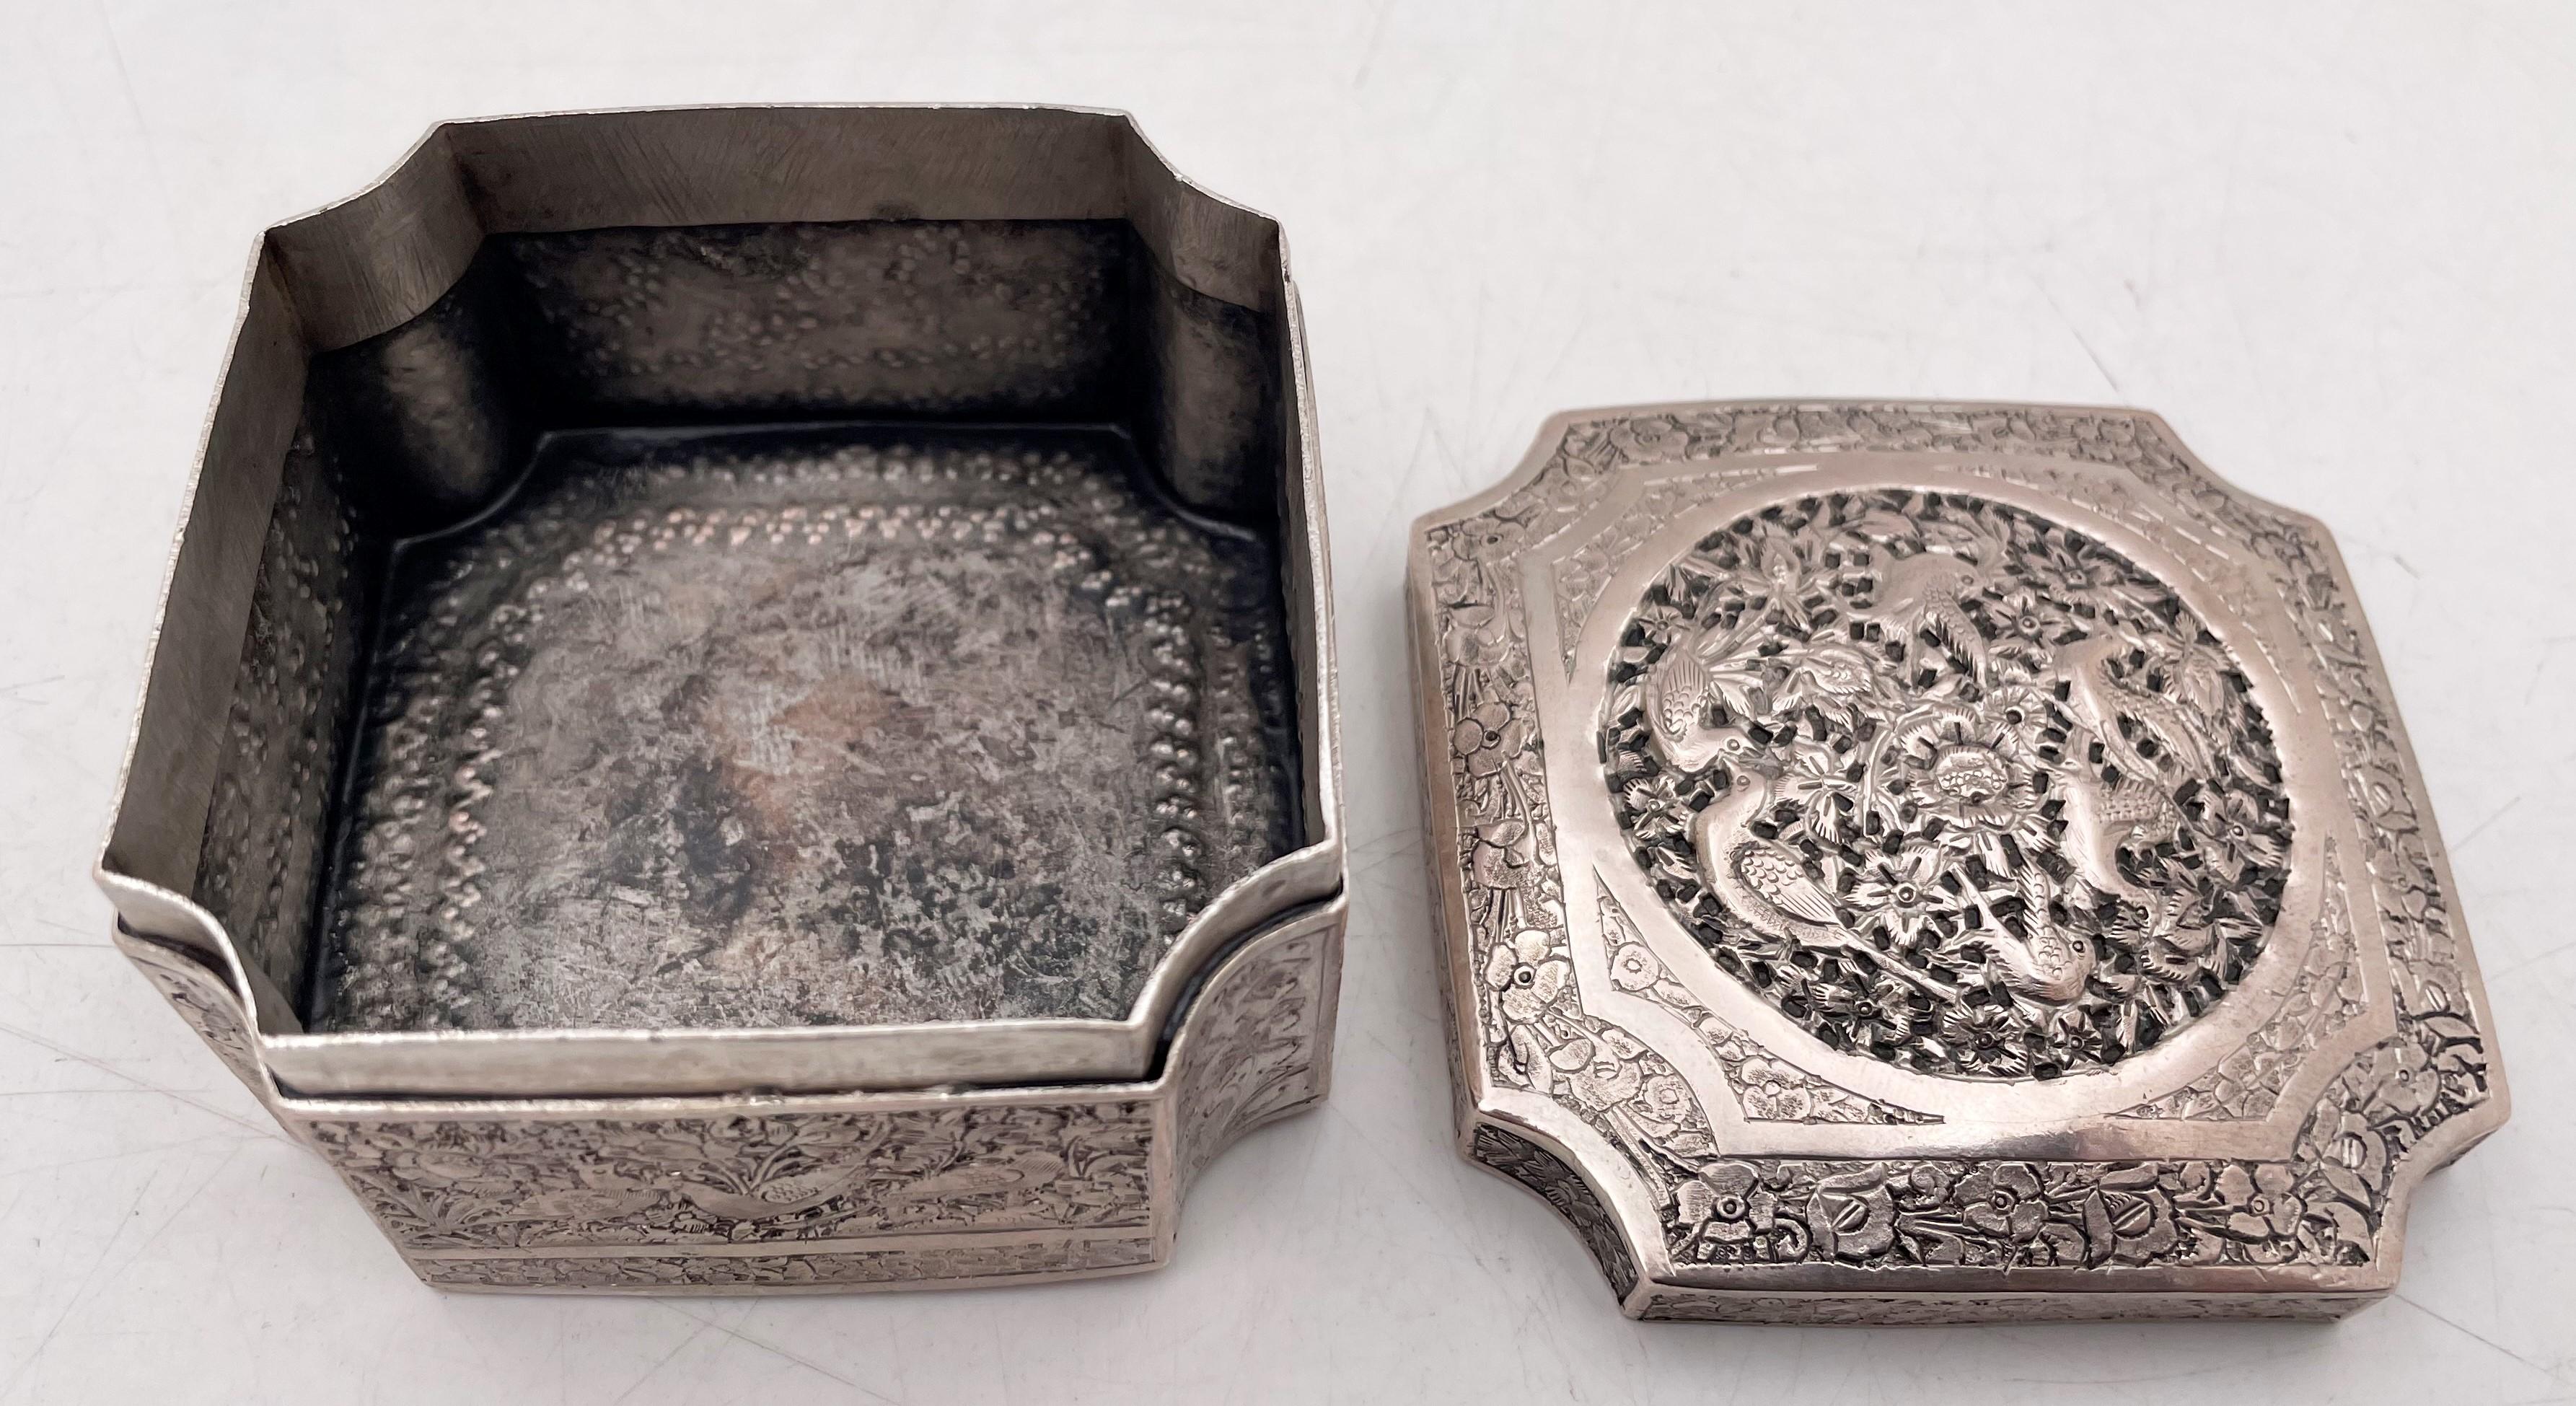 Chinese silver box, with an intricate design showcasing birds, floral, and other natural motifs, measuring 2 7/8'' by 2 7/8'' by 1 7/8'' in height. 

Please feel free to ask us any questions, and please see our other listings. We hand polish all